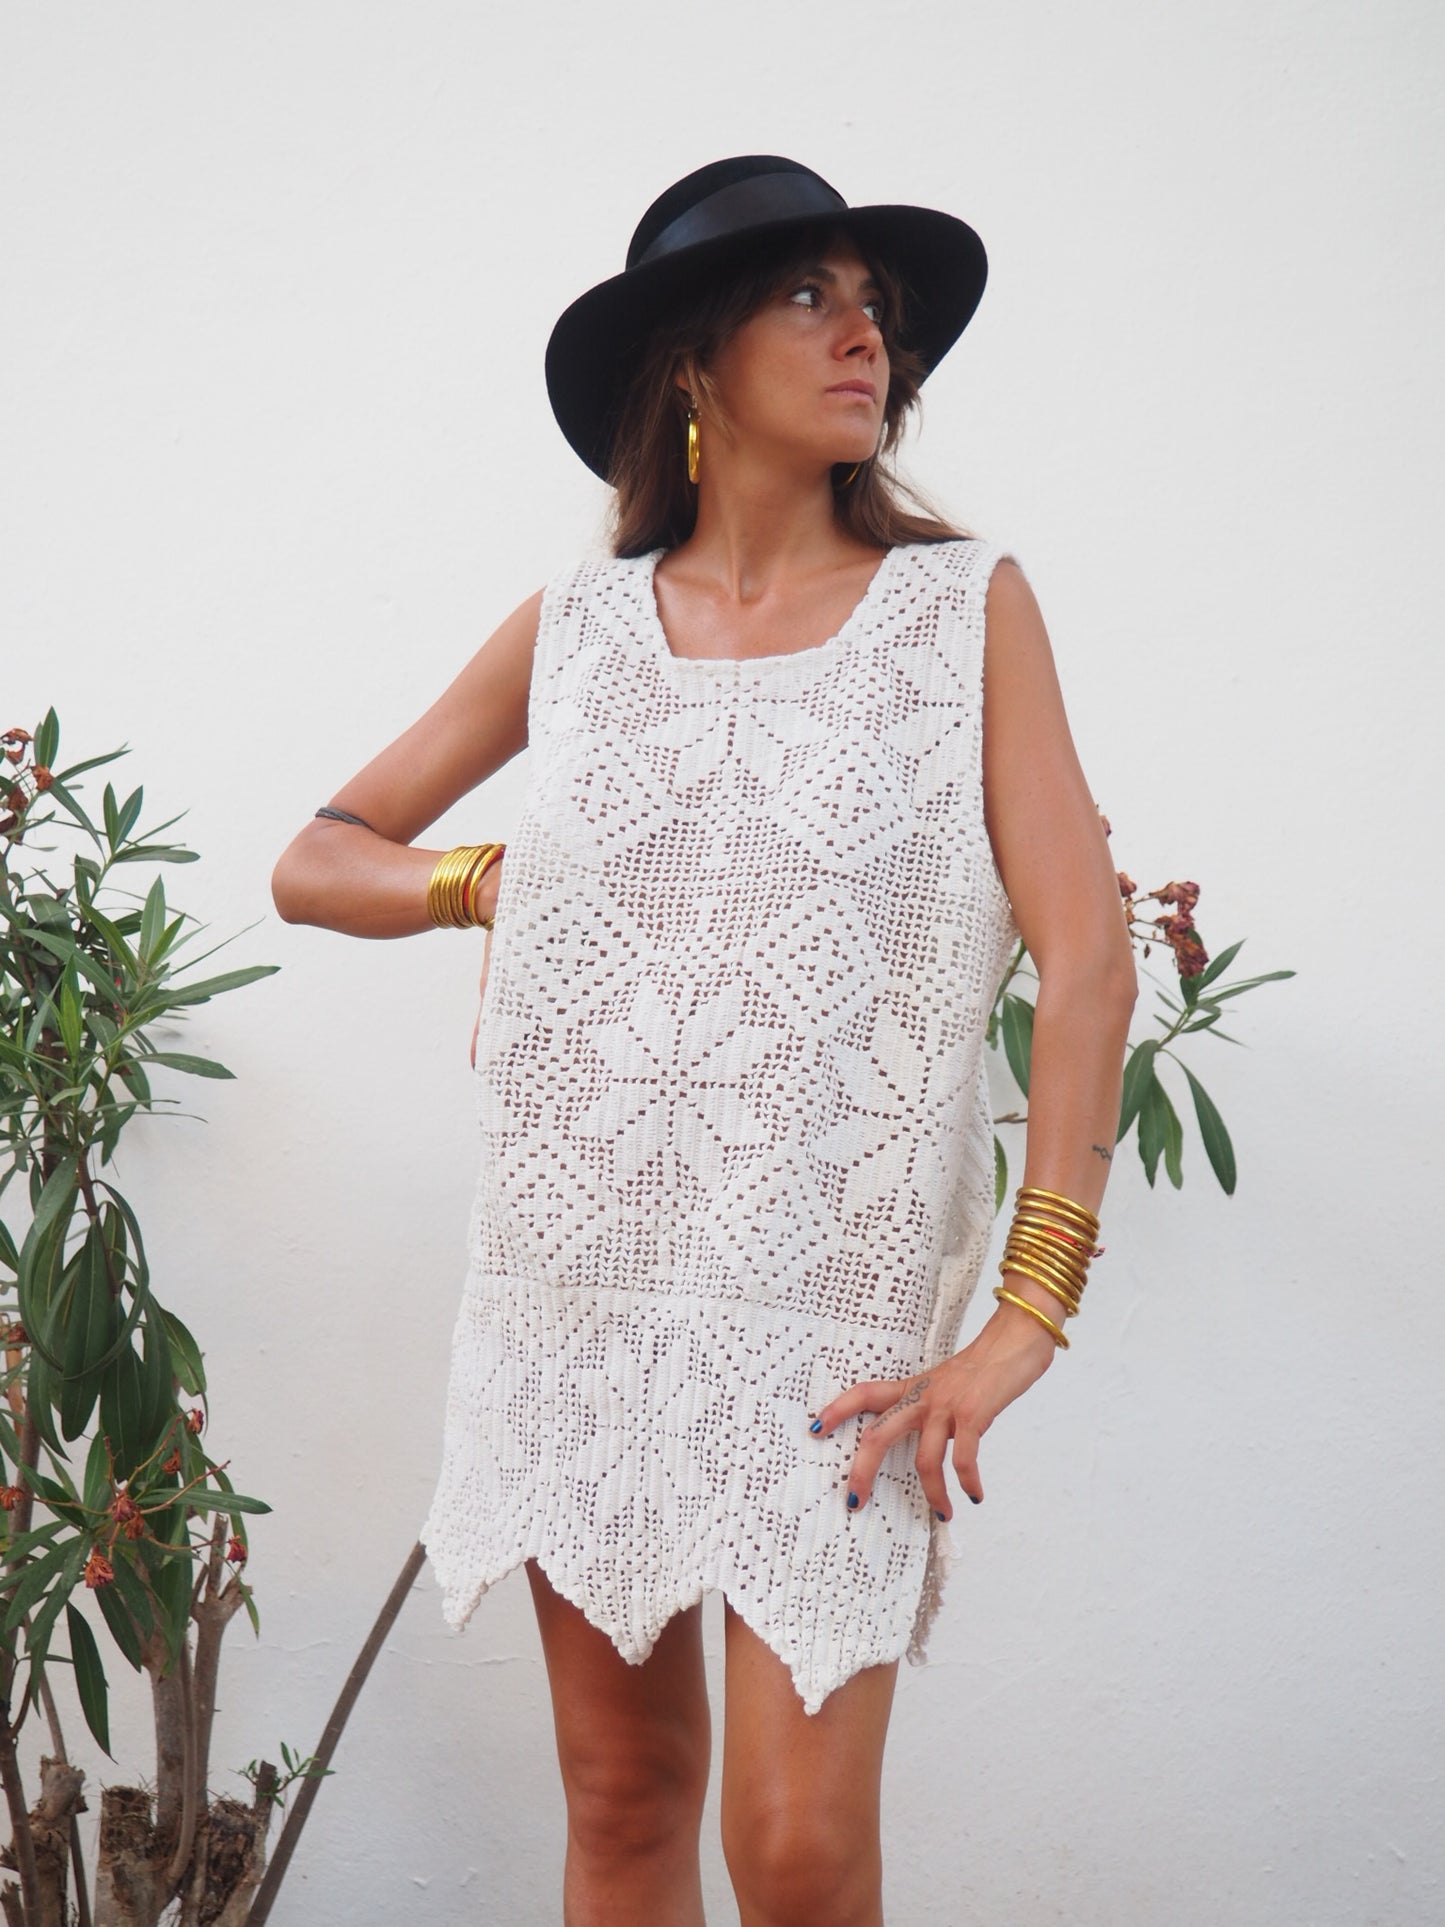 Amazing one off a kind white vintage crochet dress up-cycled by Vagabond Ibiza